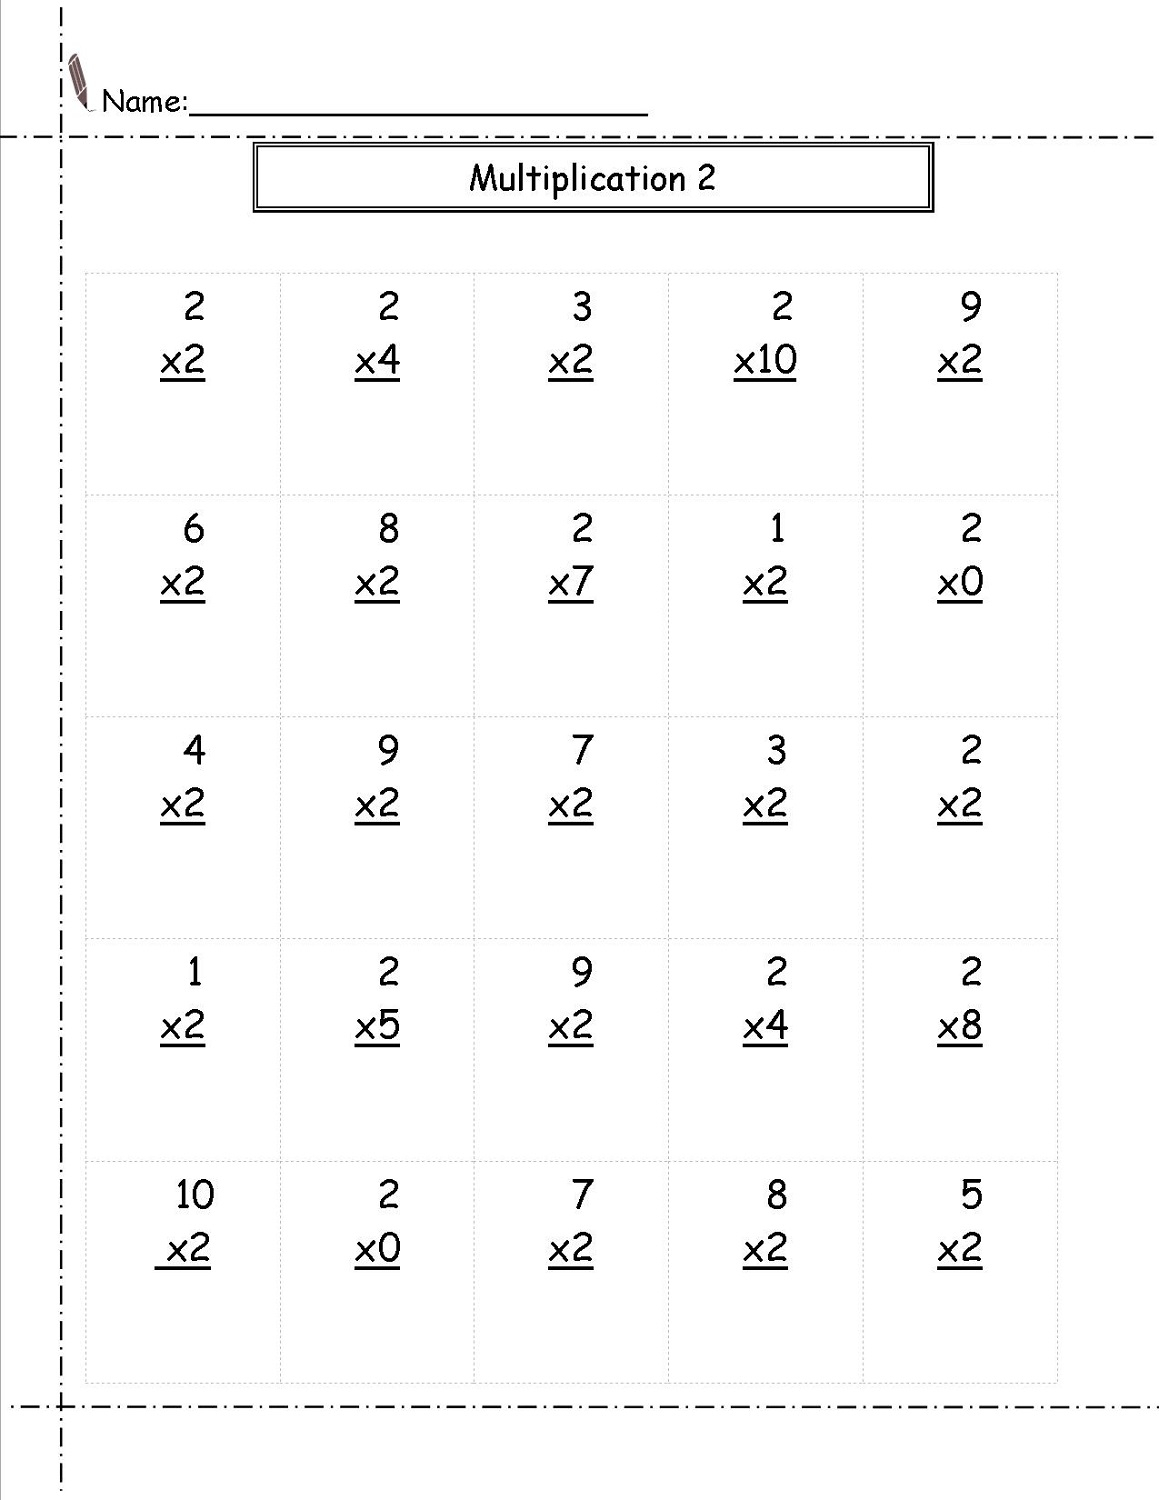 Times Tables Worksheet 1 10 | Printable Worksheets And throughout Printable Multiplication Times Table